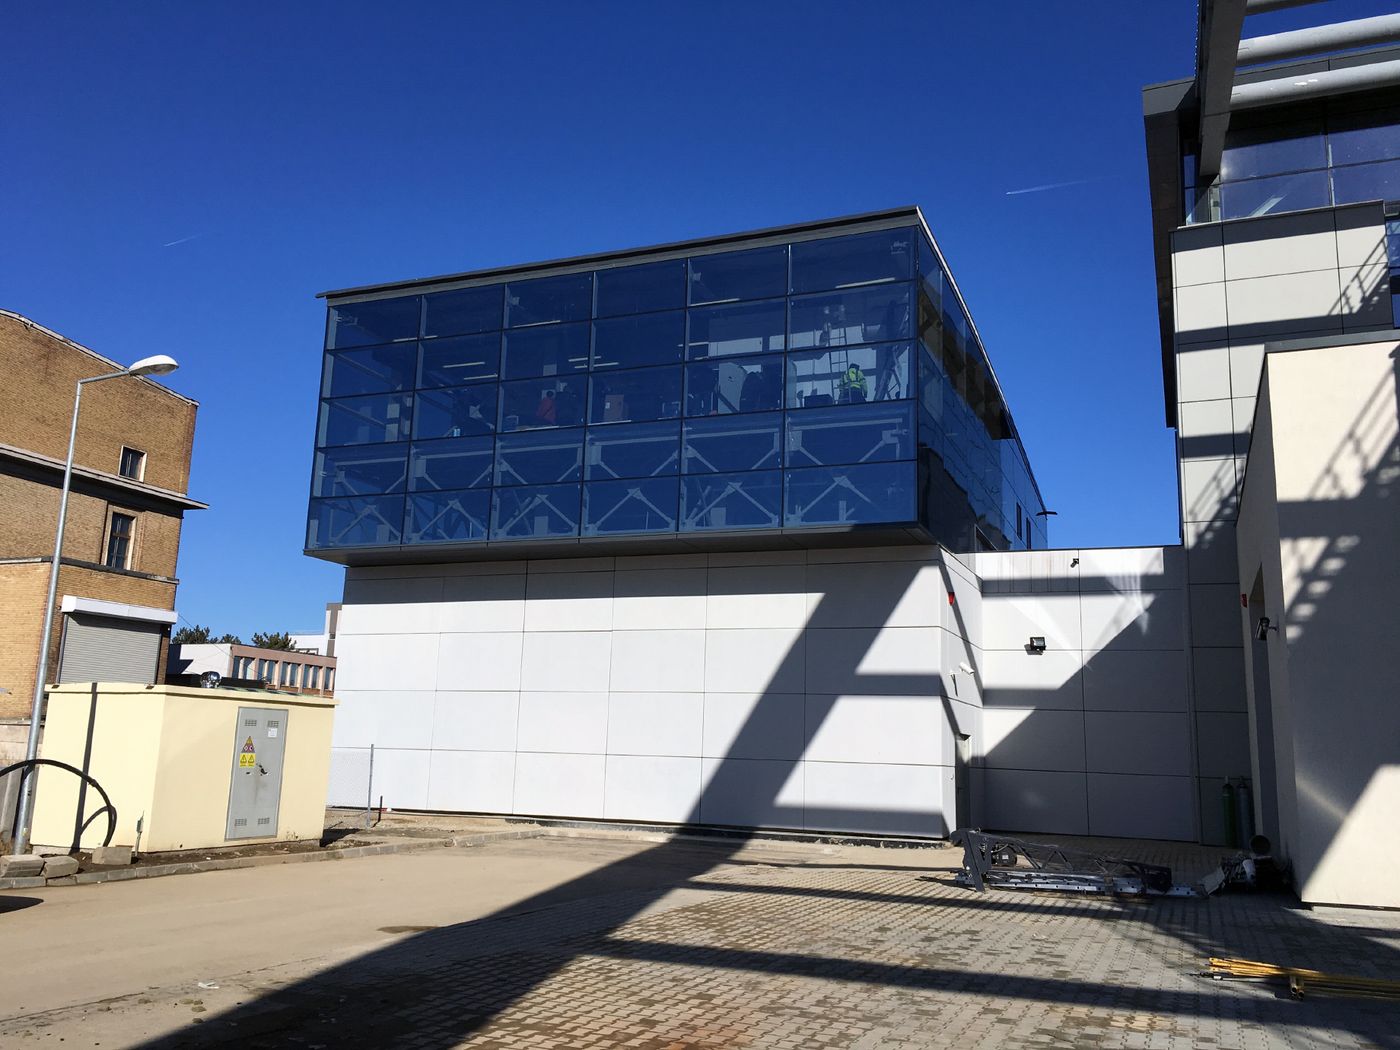 Photo: street-view of a building with steel structure, concrete and glass elements; on the left, electric appliances; on the right, part of another building